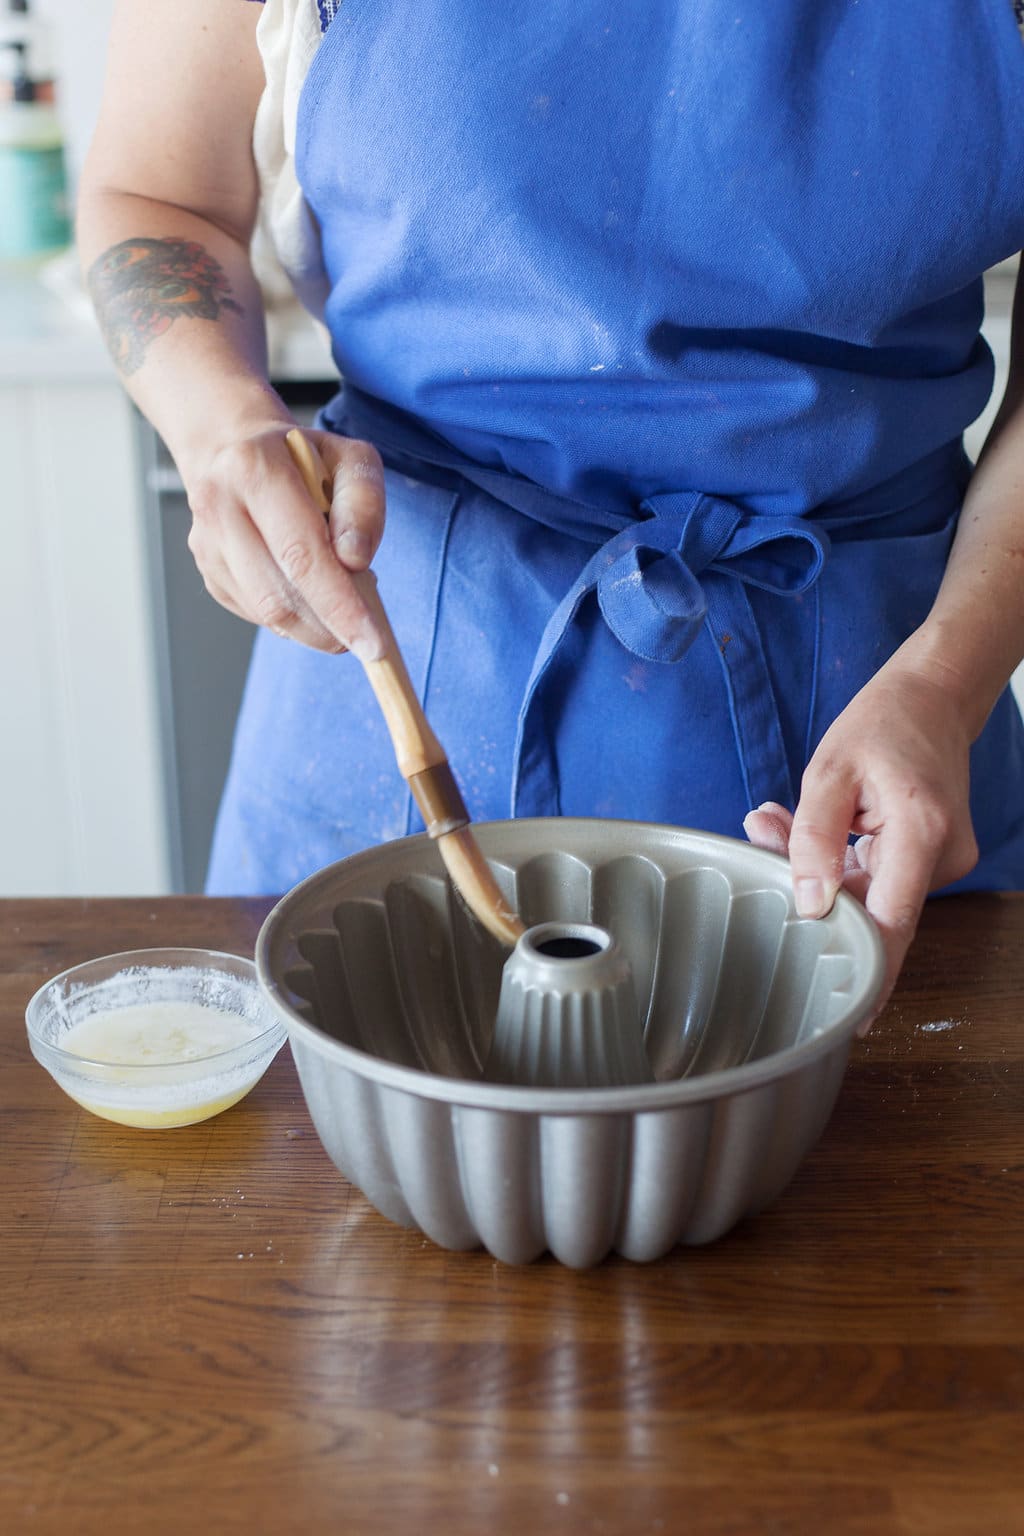 If using silicone bakeware, do I need to grease and flour the inside before  baking? - Quora